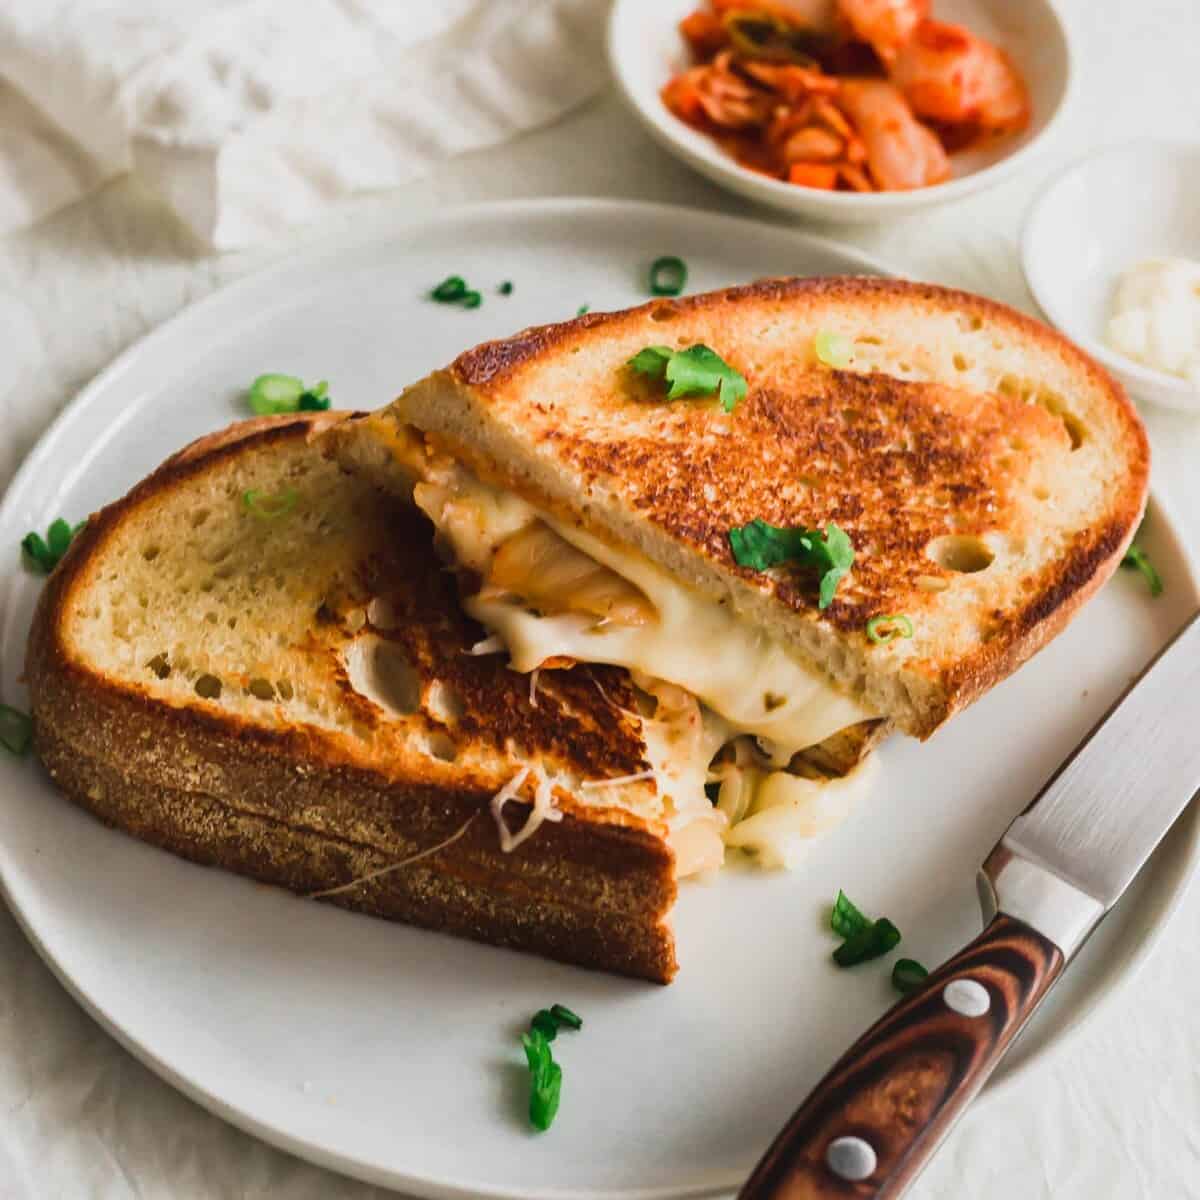 A grilled cheese sandwich with golden toasted white bread, cut in half with melted white cheese oozing out.